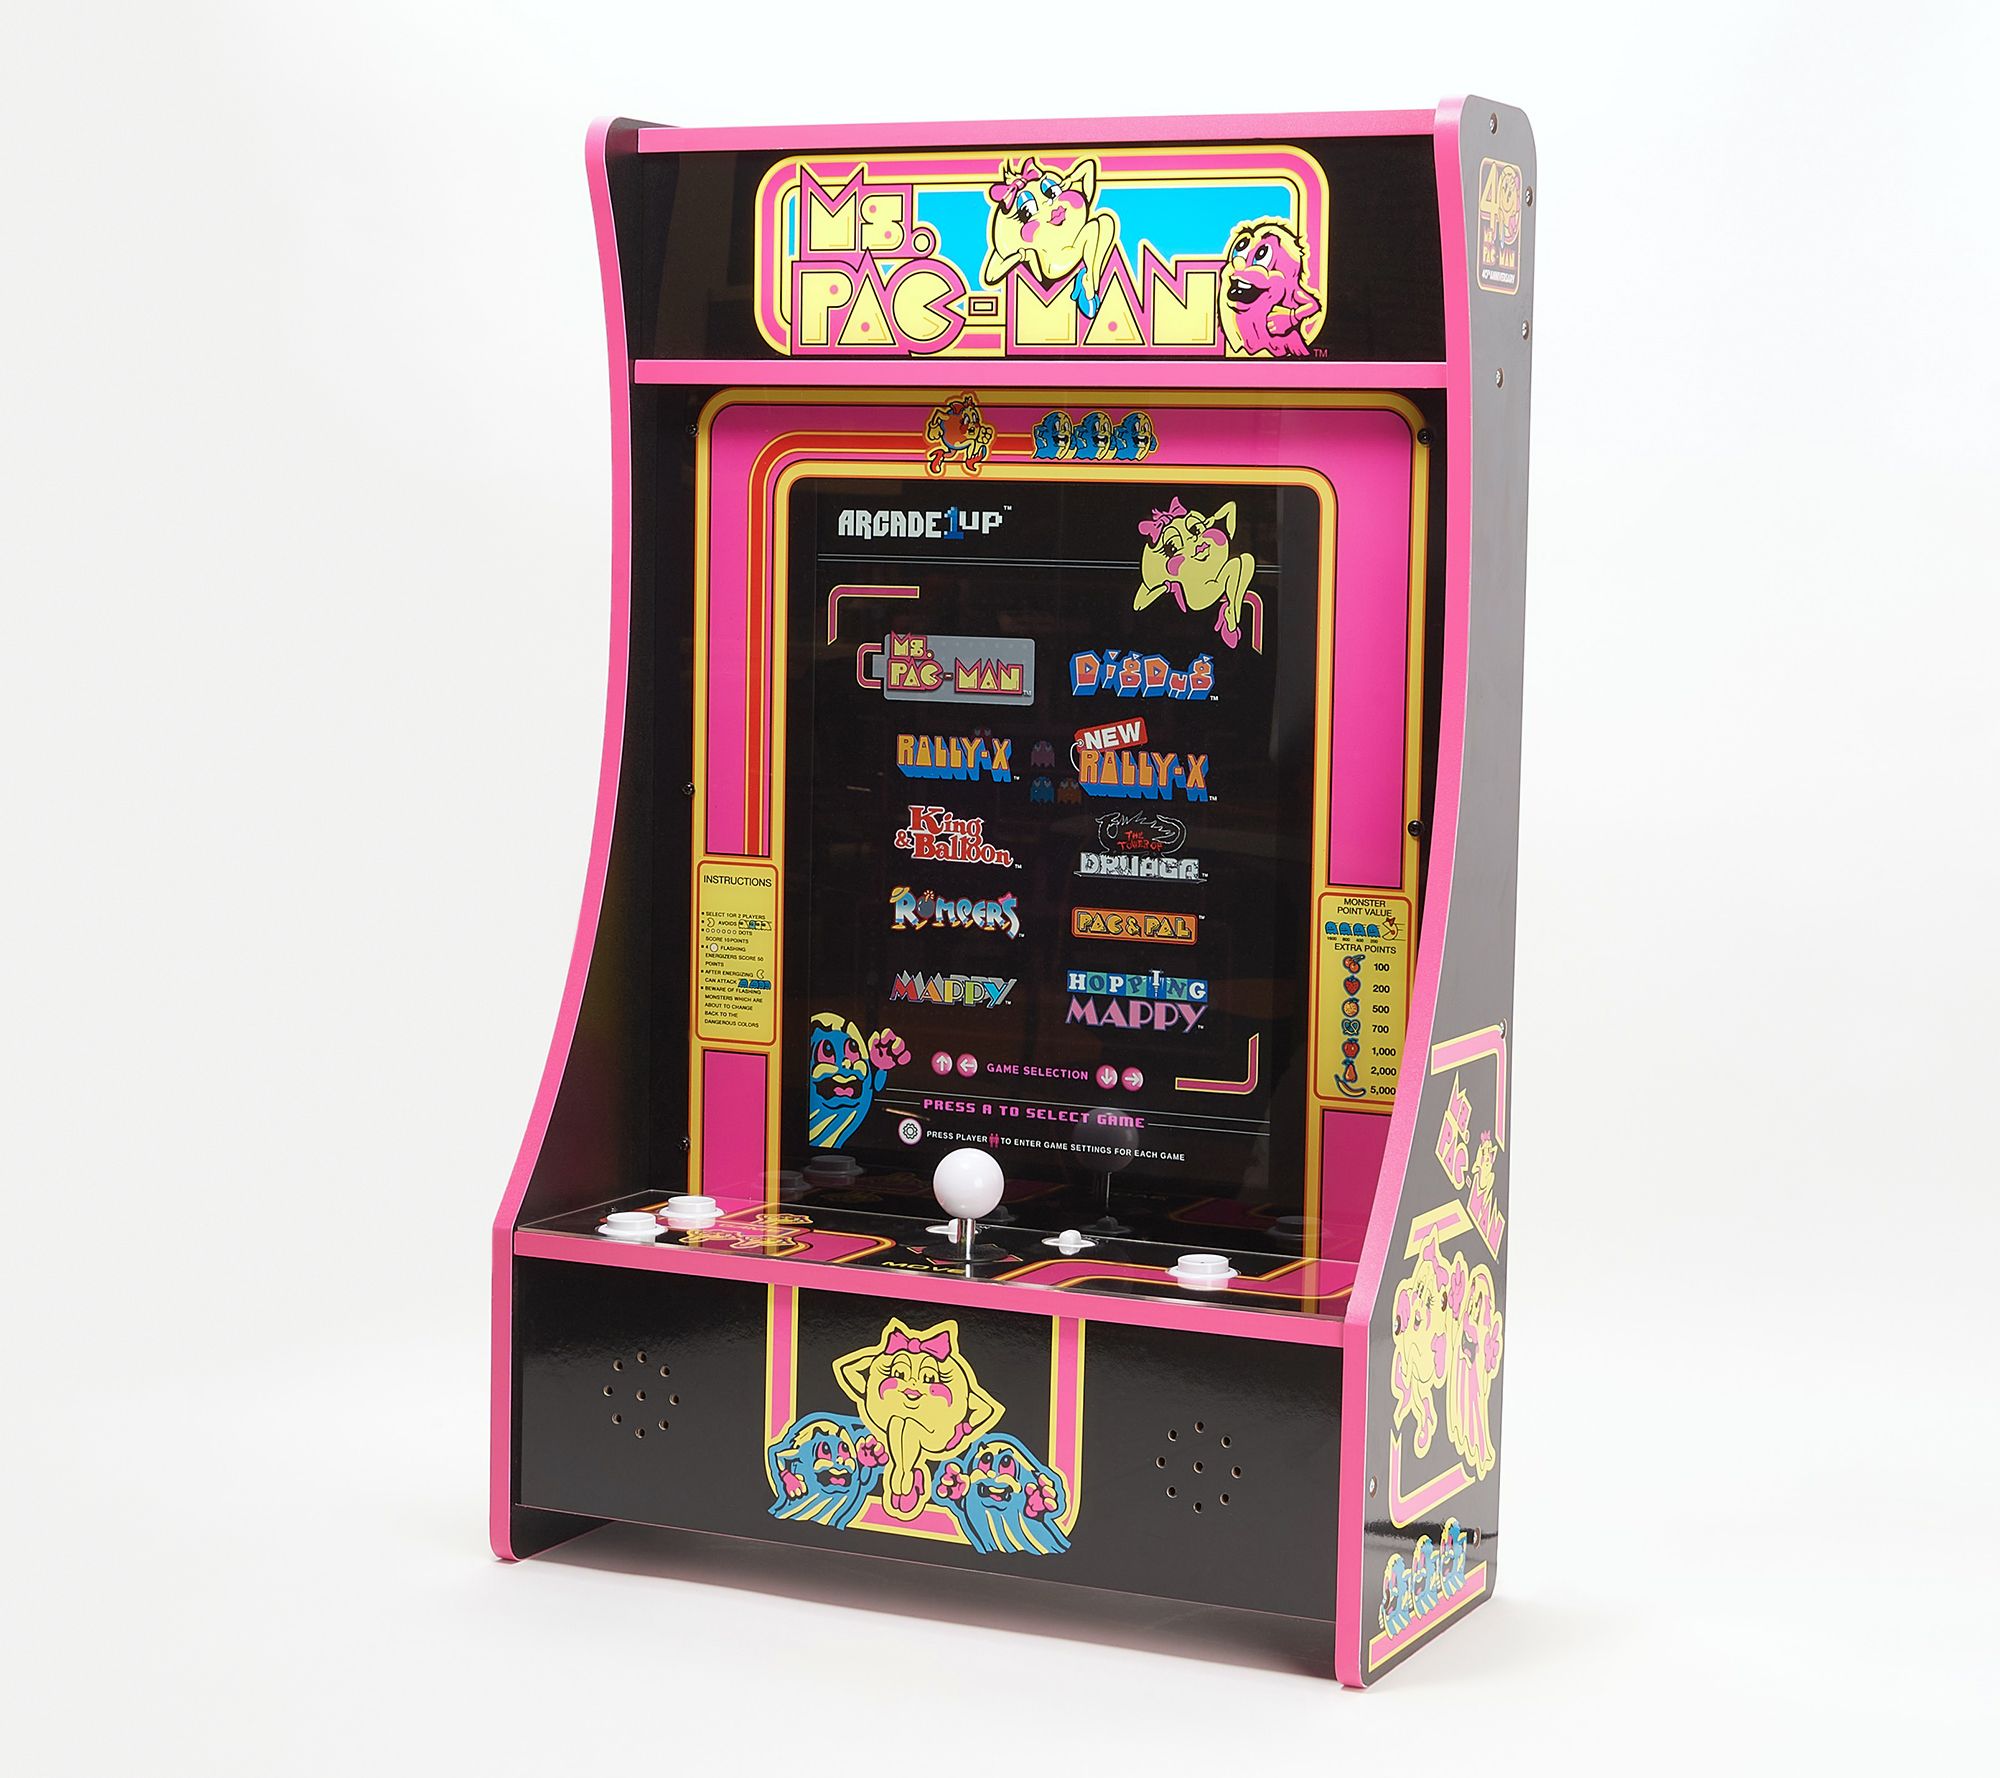 Arcade1Up 10-Game PartyCade Ms. Pac-Man or Super Pac-Man - $121.22 + $9.97 S&H $132